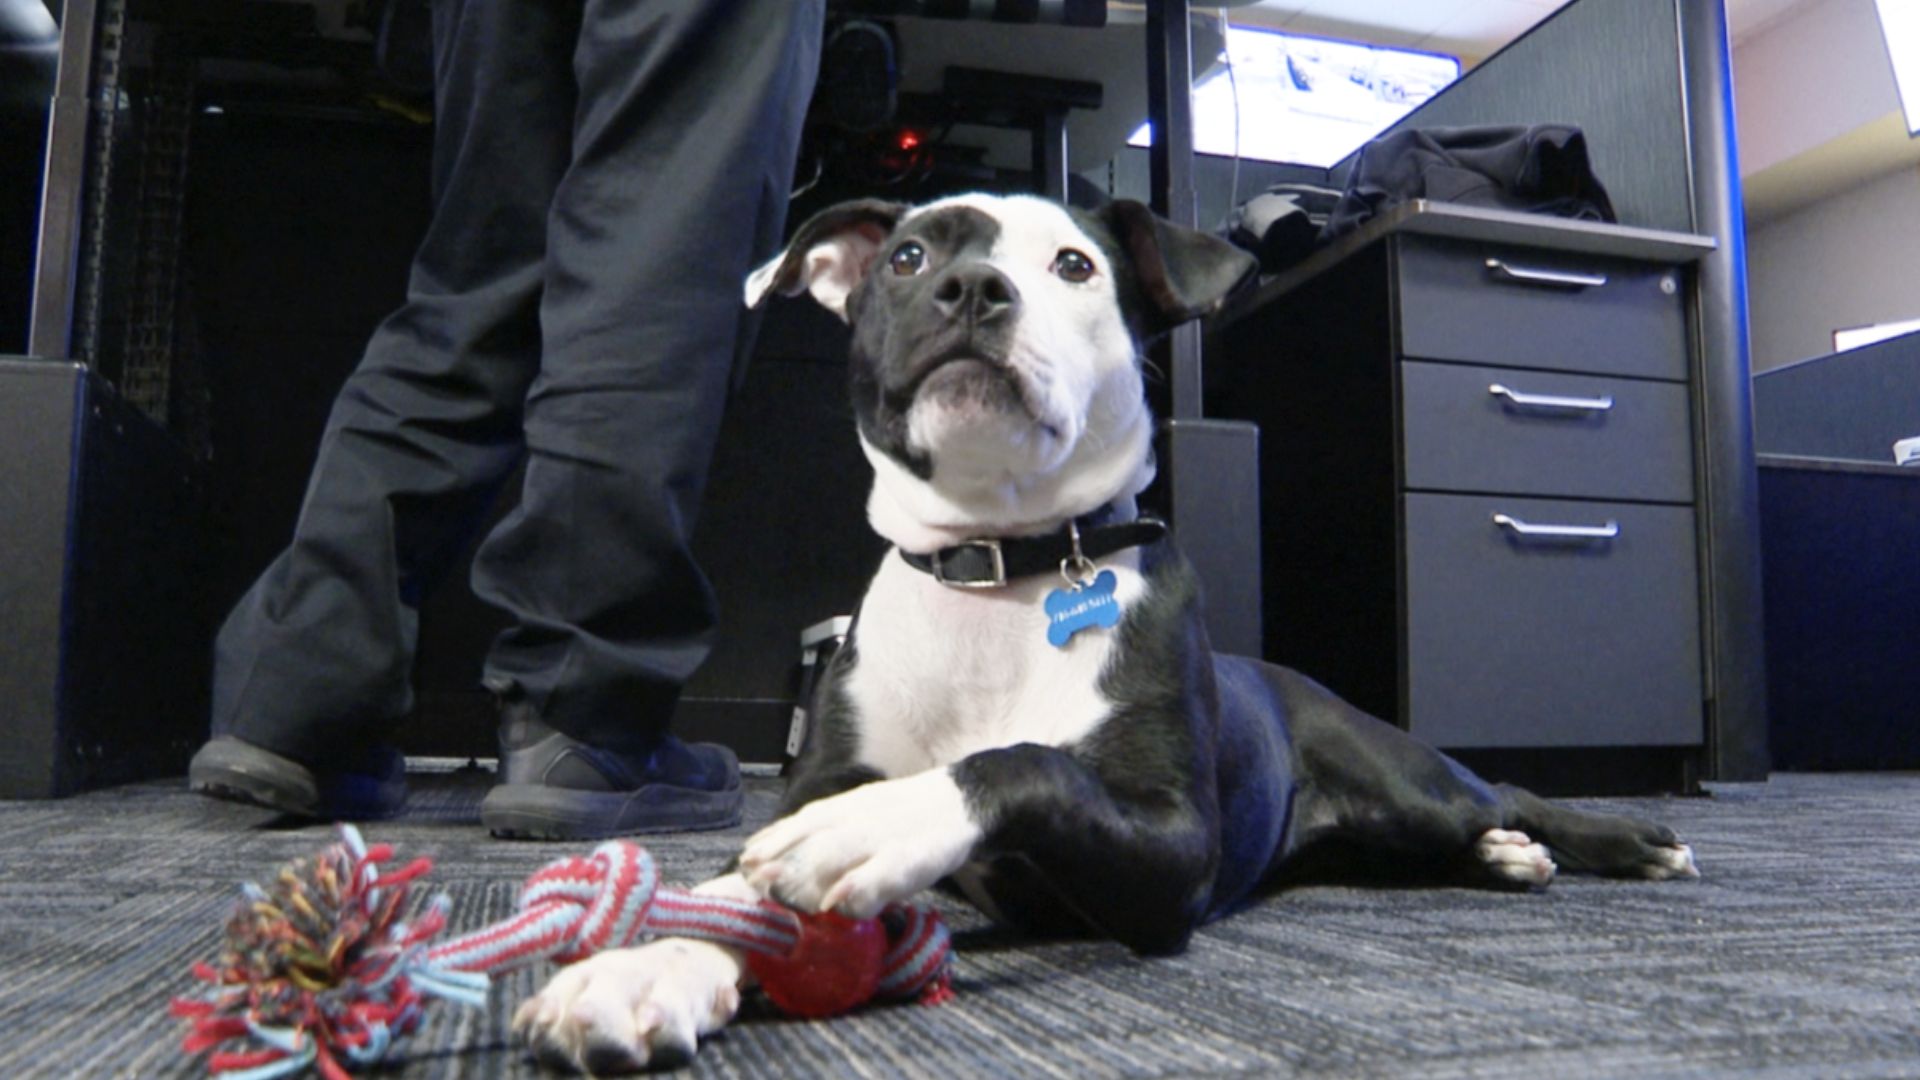 Police Department Adopts A Puppy After Rescuing Her From A Snow Storm 